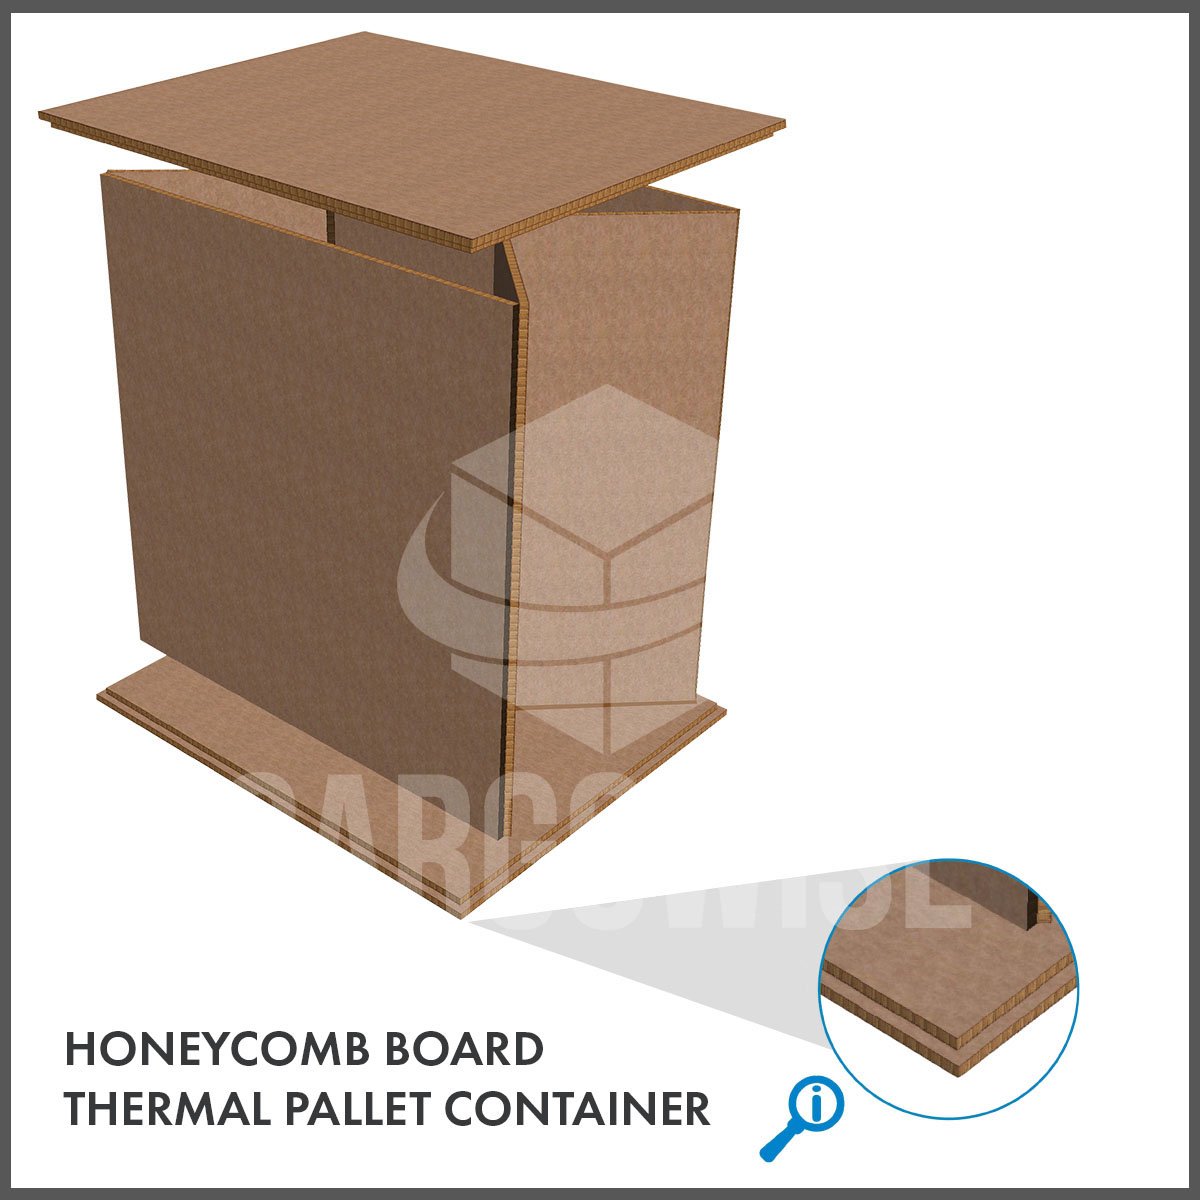 Honeycomb board pallet container drawing 1200 x 1200px with watermark